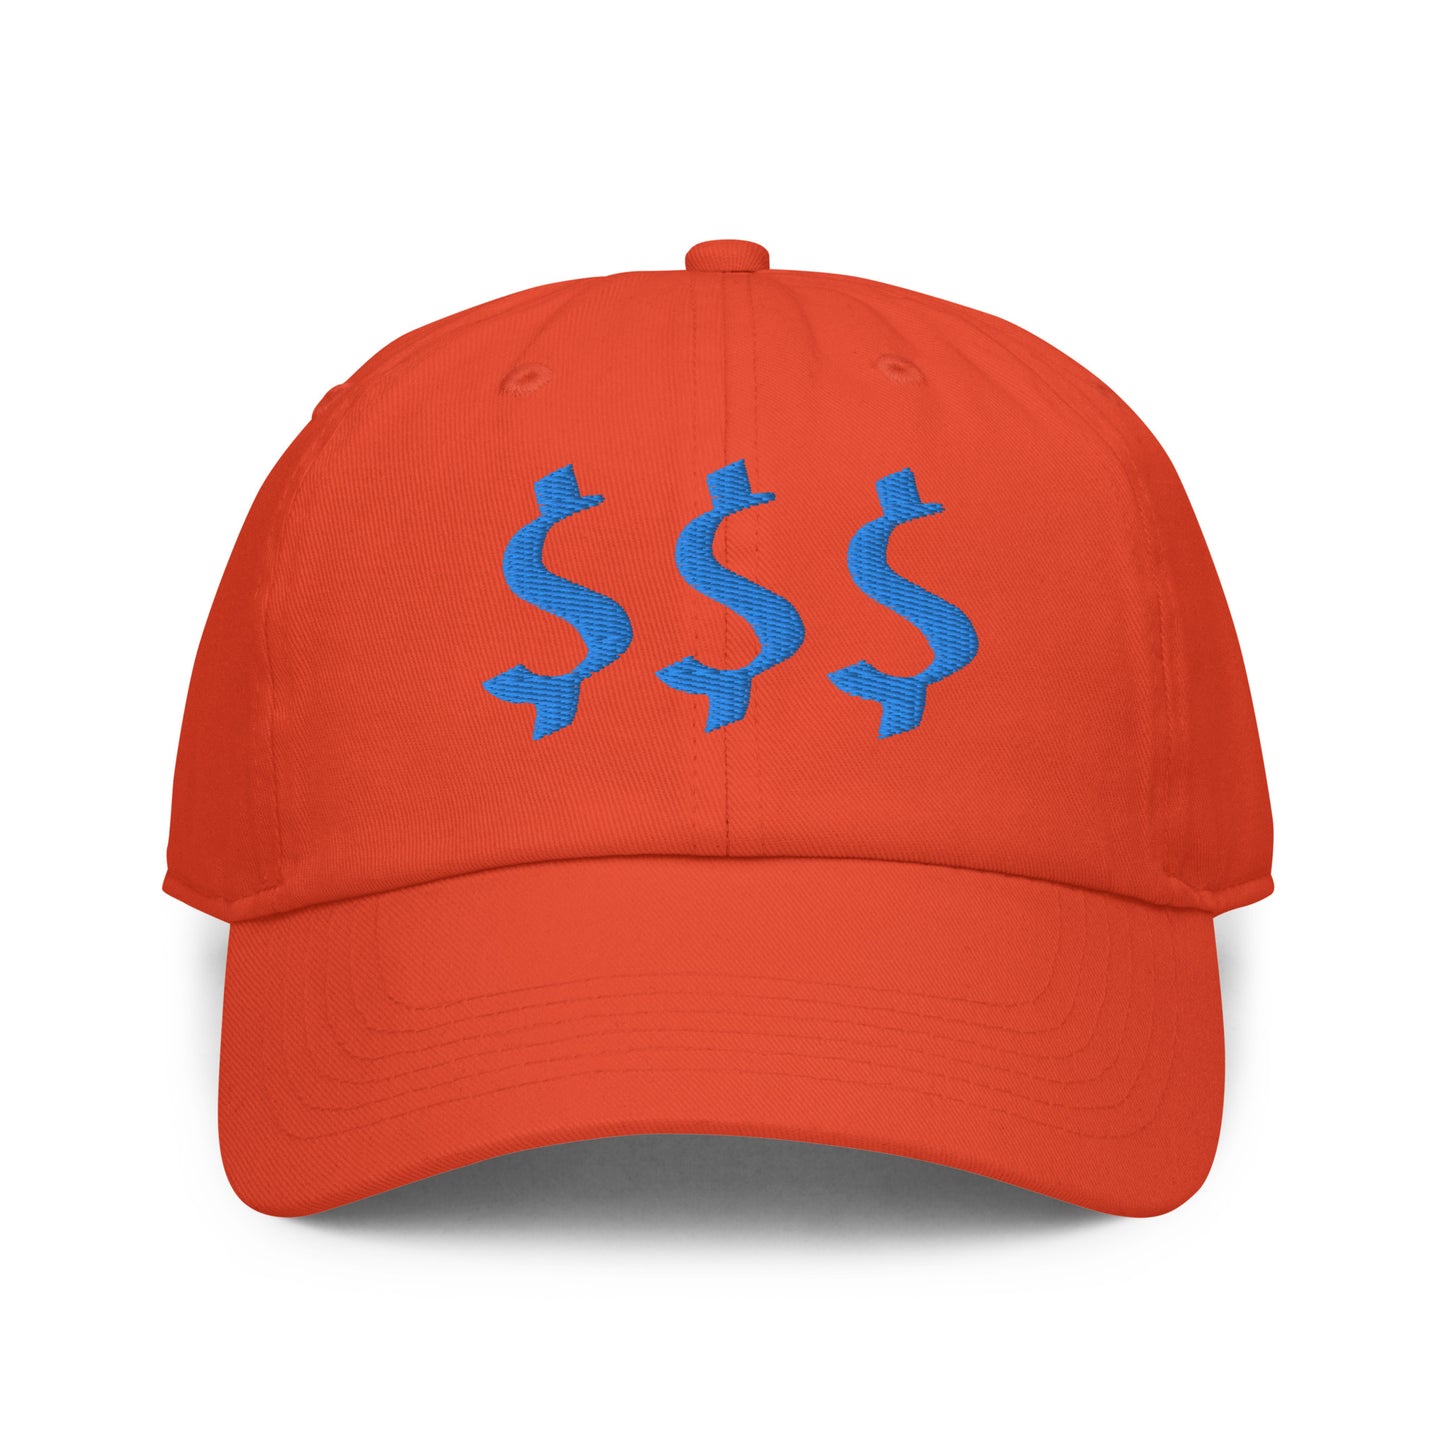 Blue Dollar Sign Fitted cap